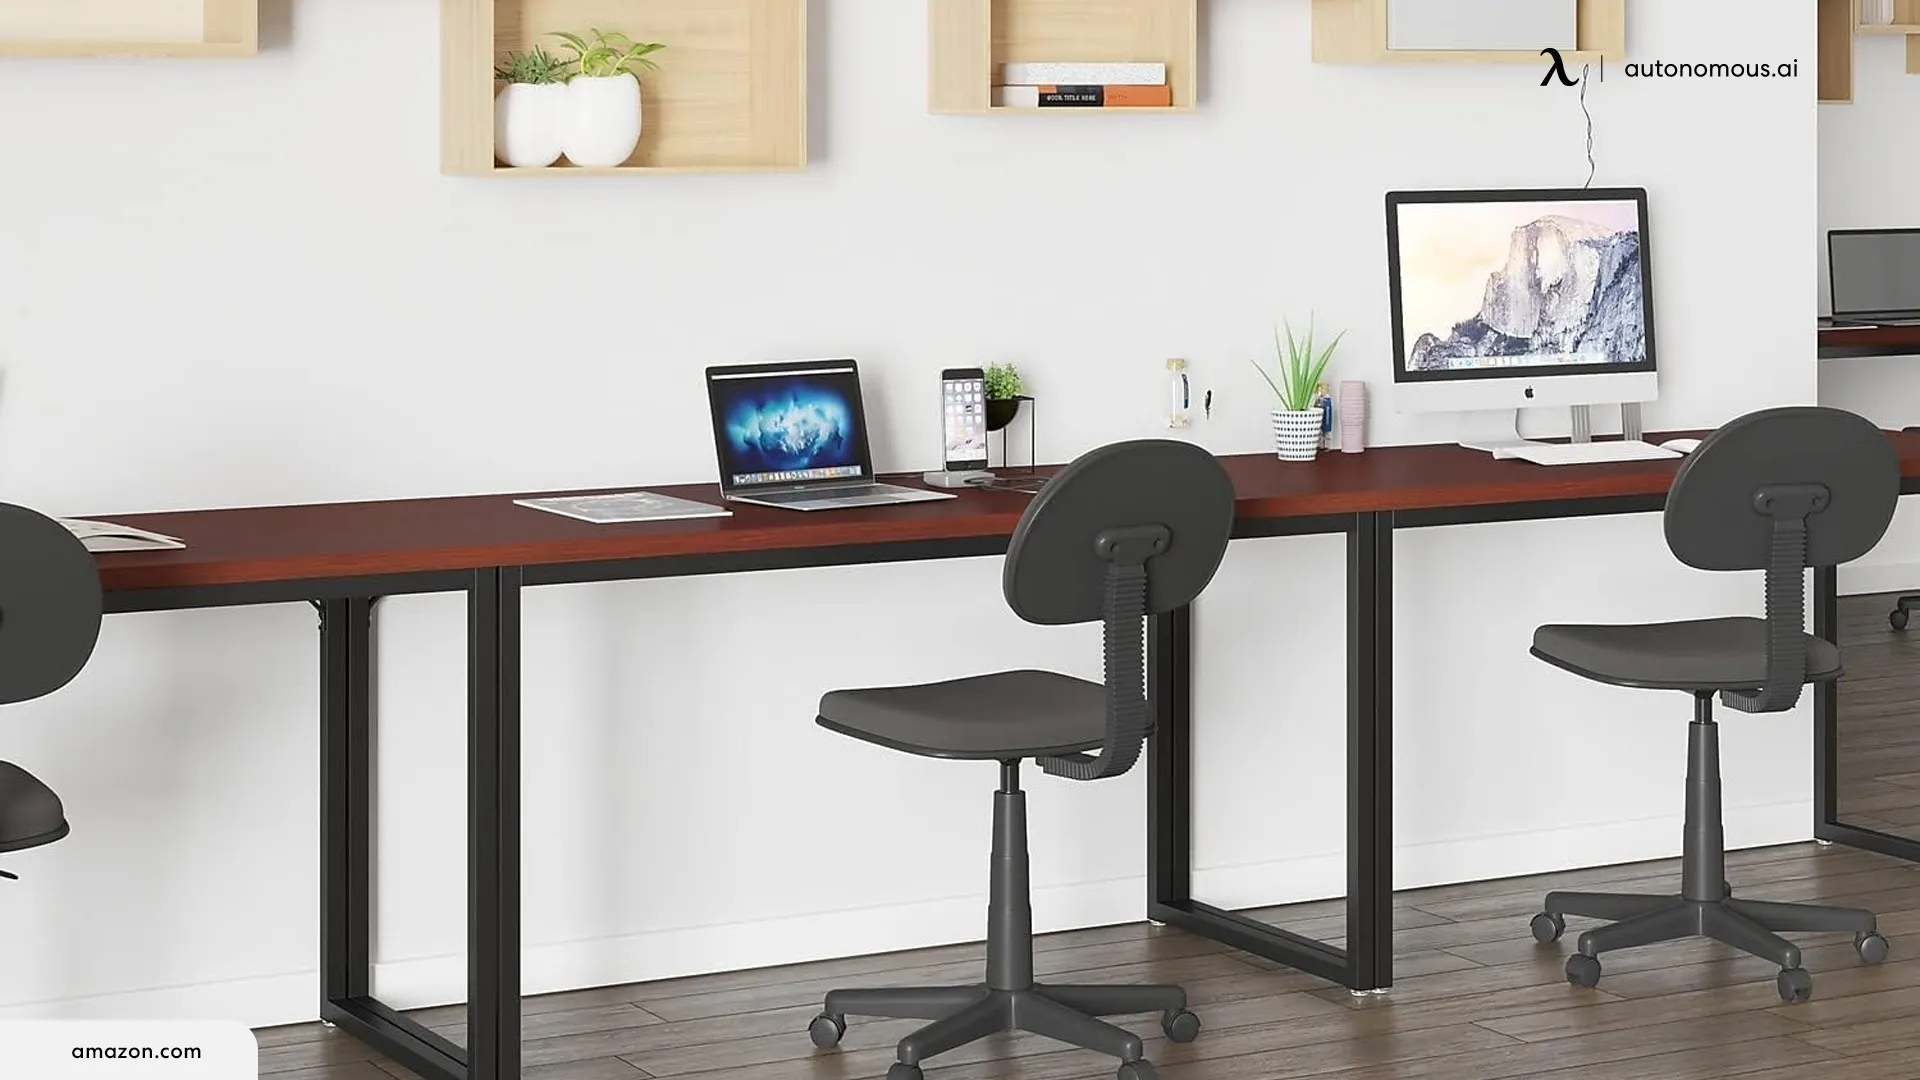 How to Shop Commercial Grade Desks at Best Price